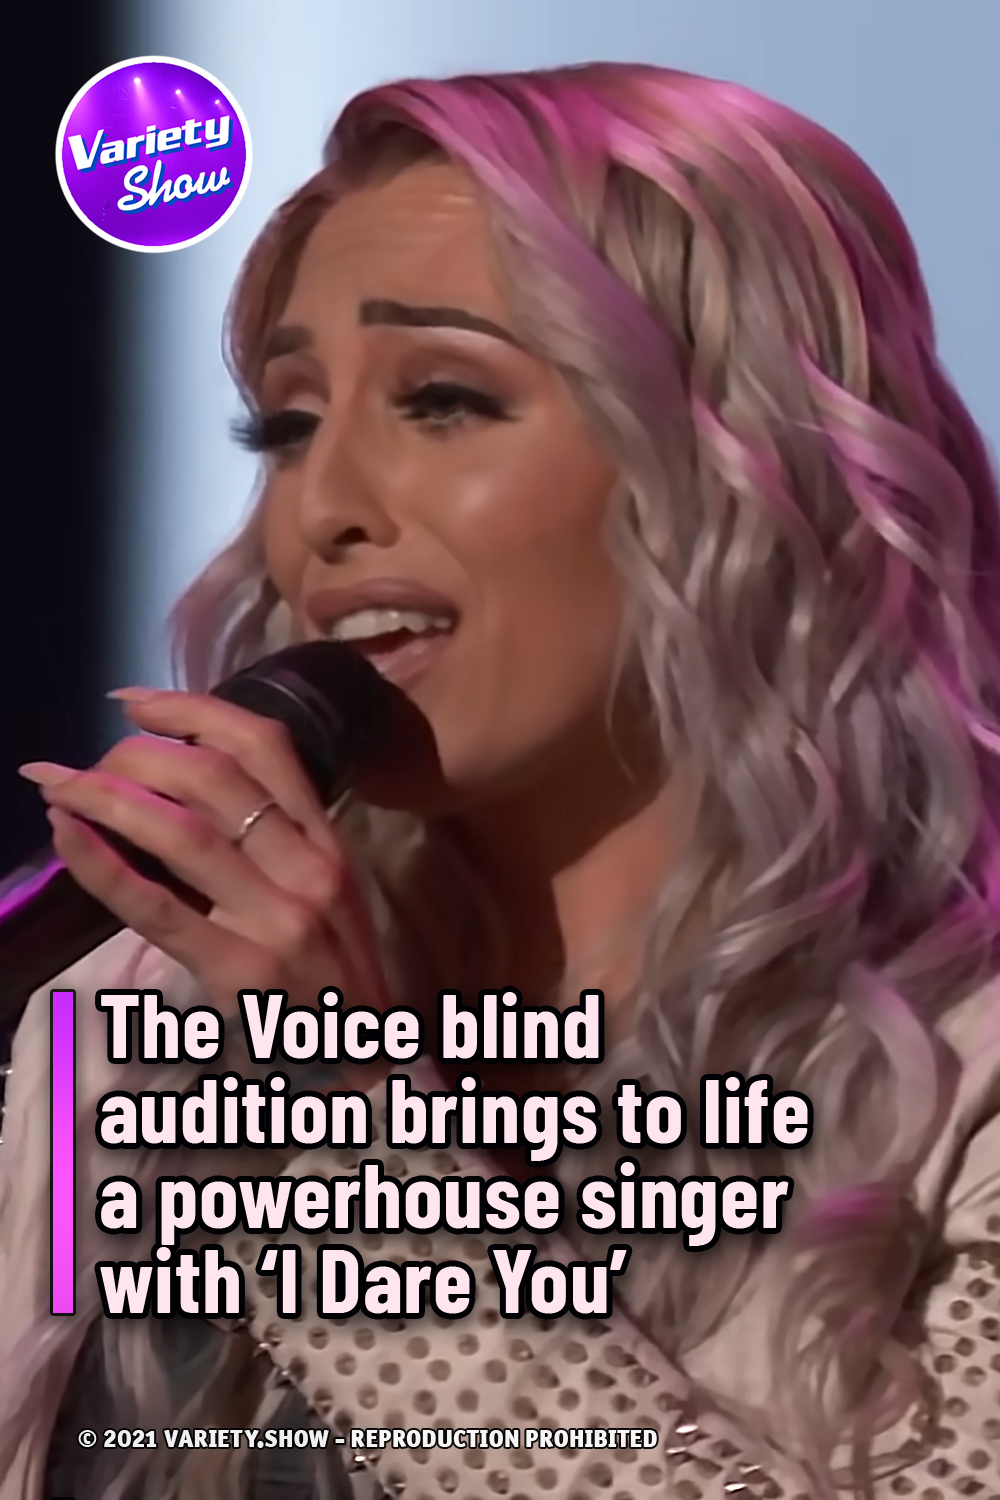 The Voice blind audition brings to life a powerhouse singer with ‘I Dare You’